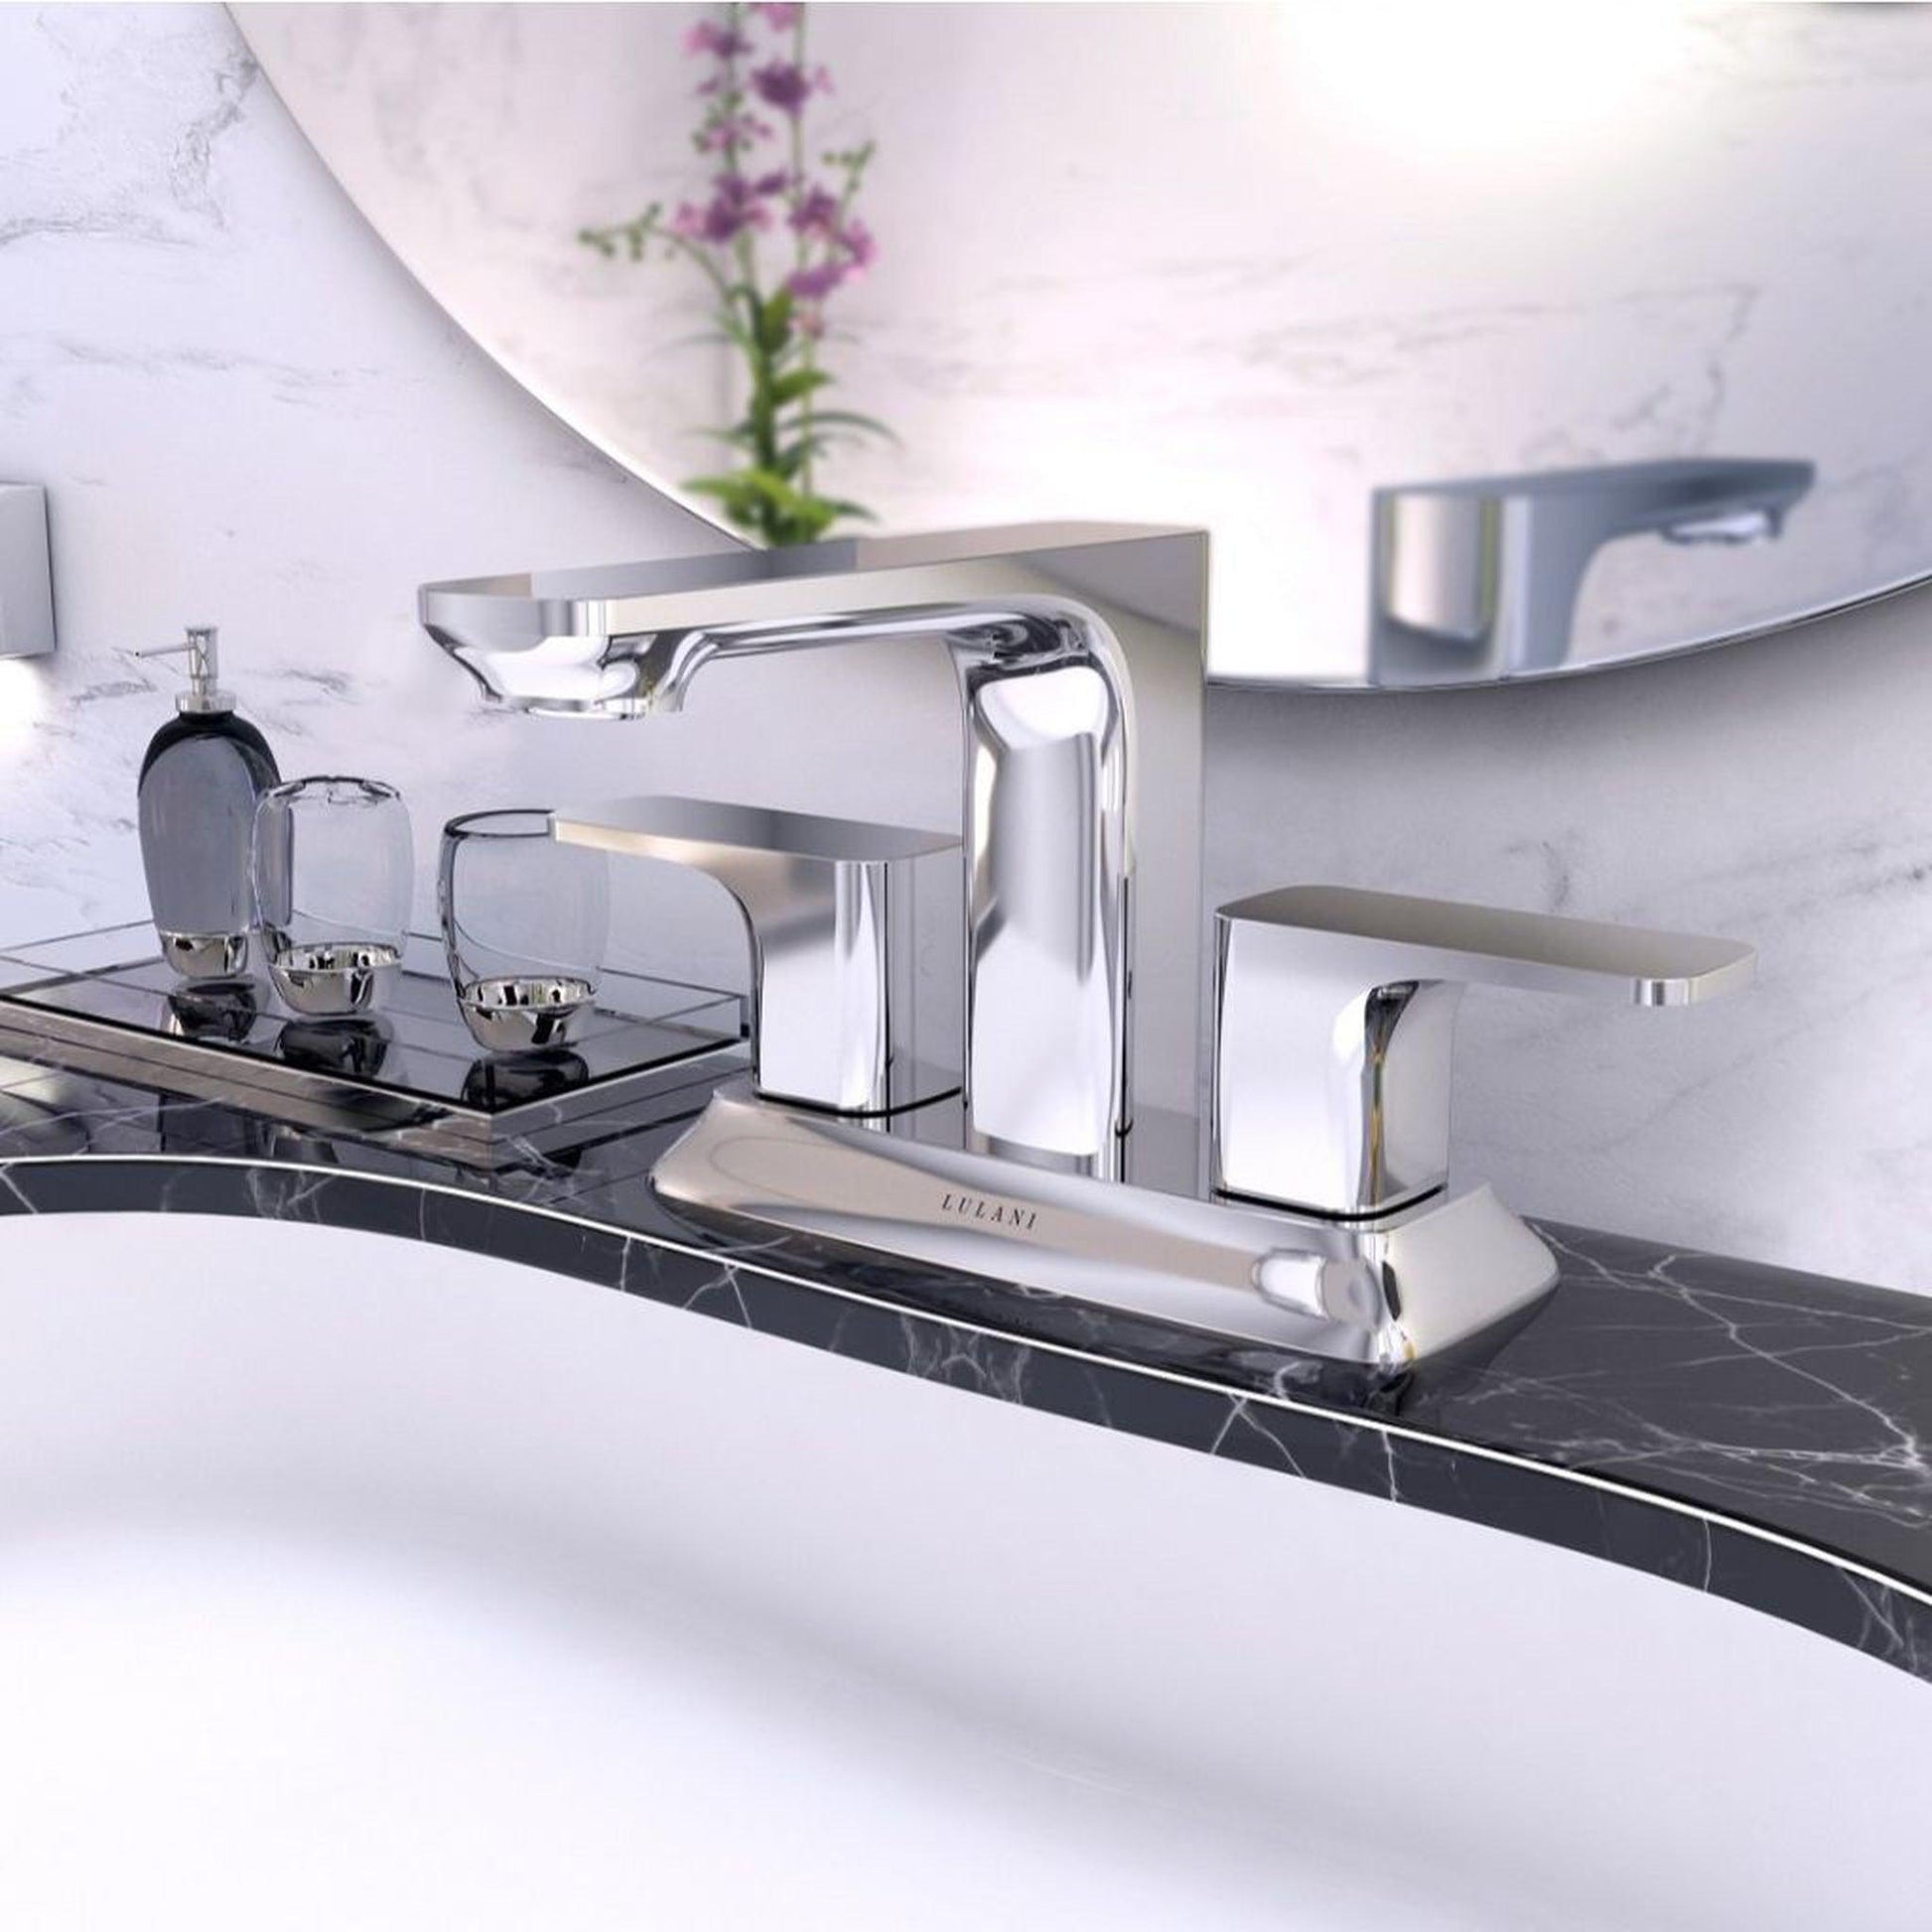 Lulani Corsica Chrome 1.2 GPM Two Handle Centerset Faucet With Drain Assembly